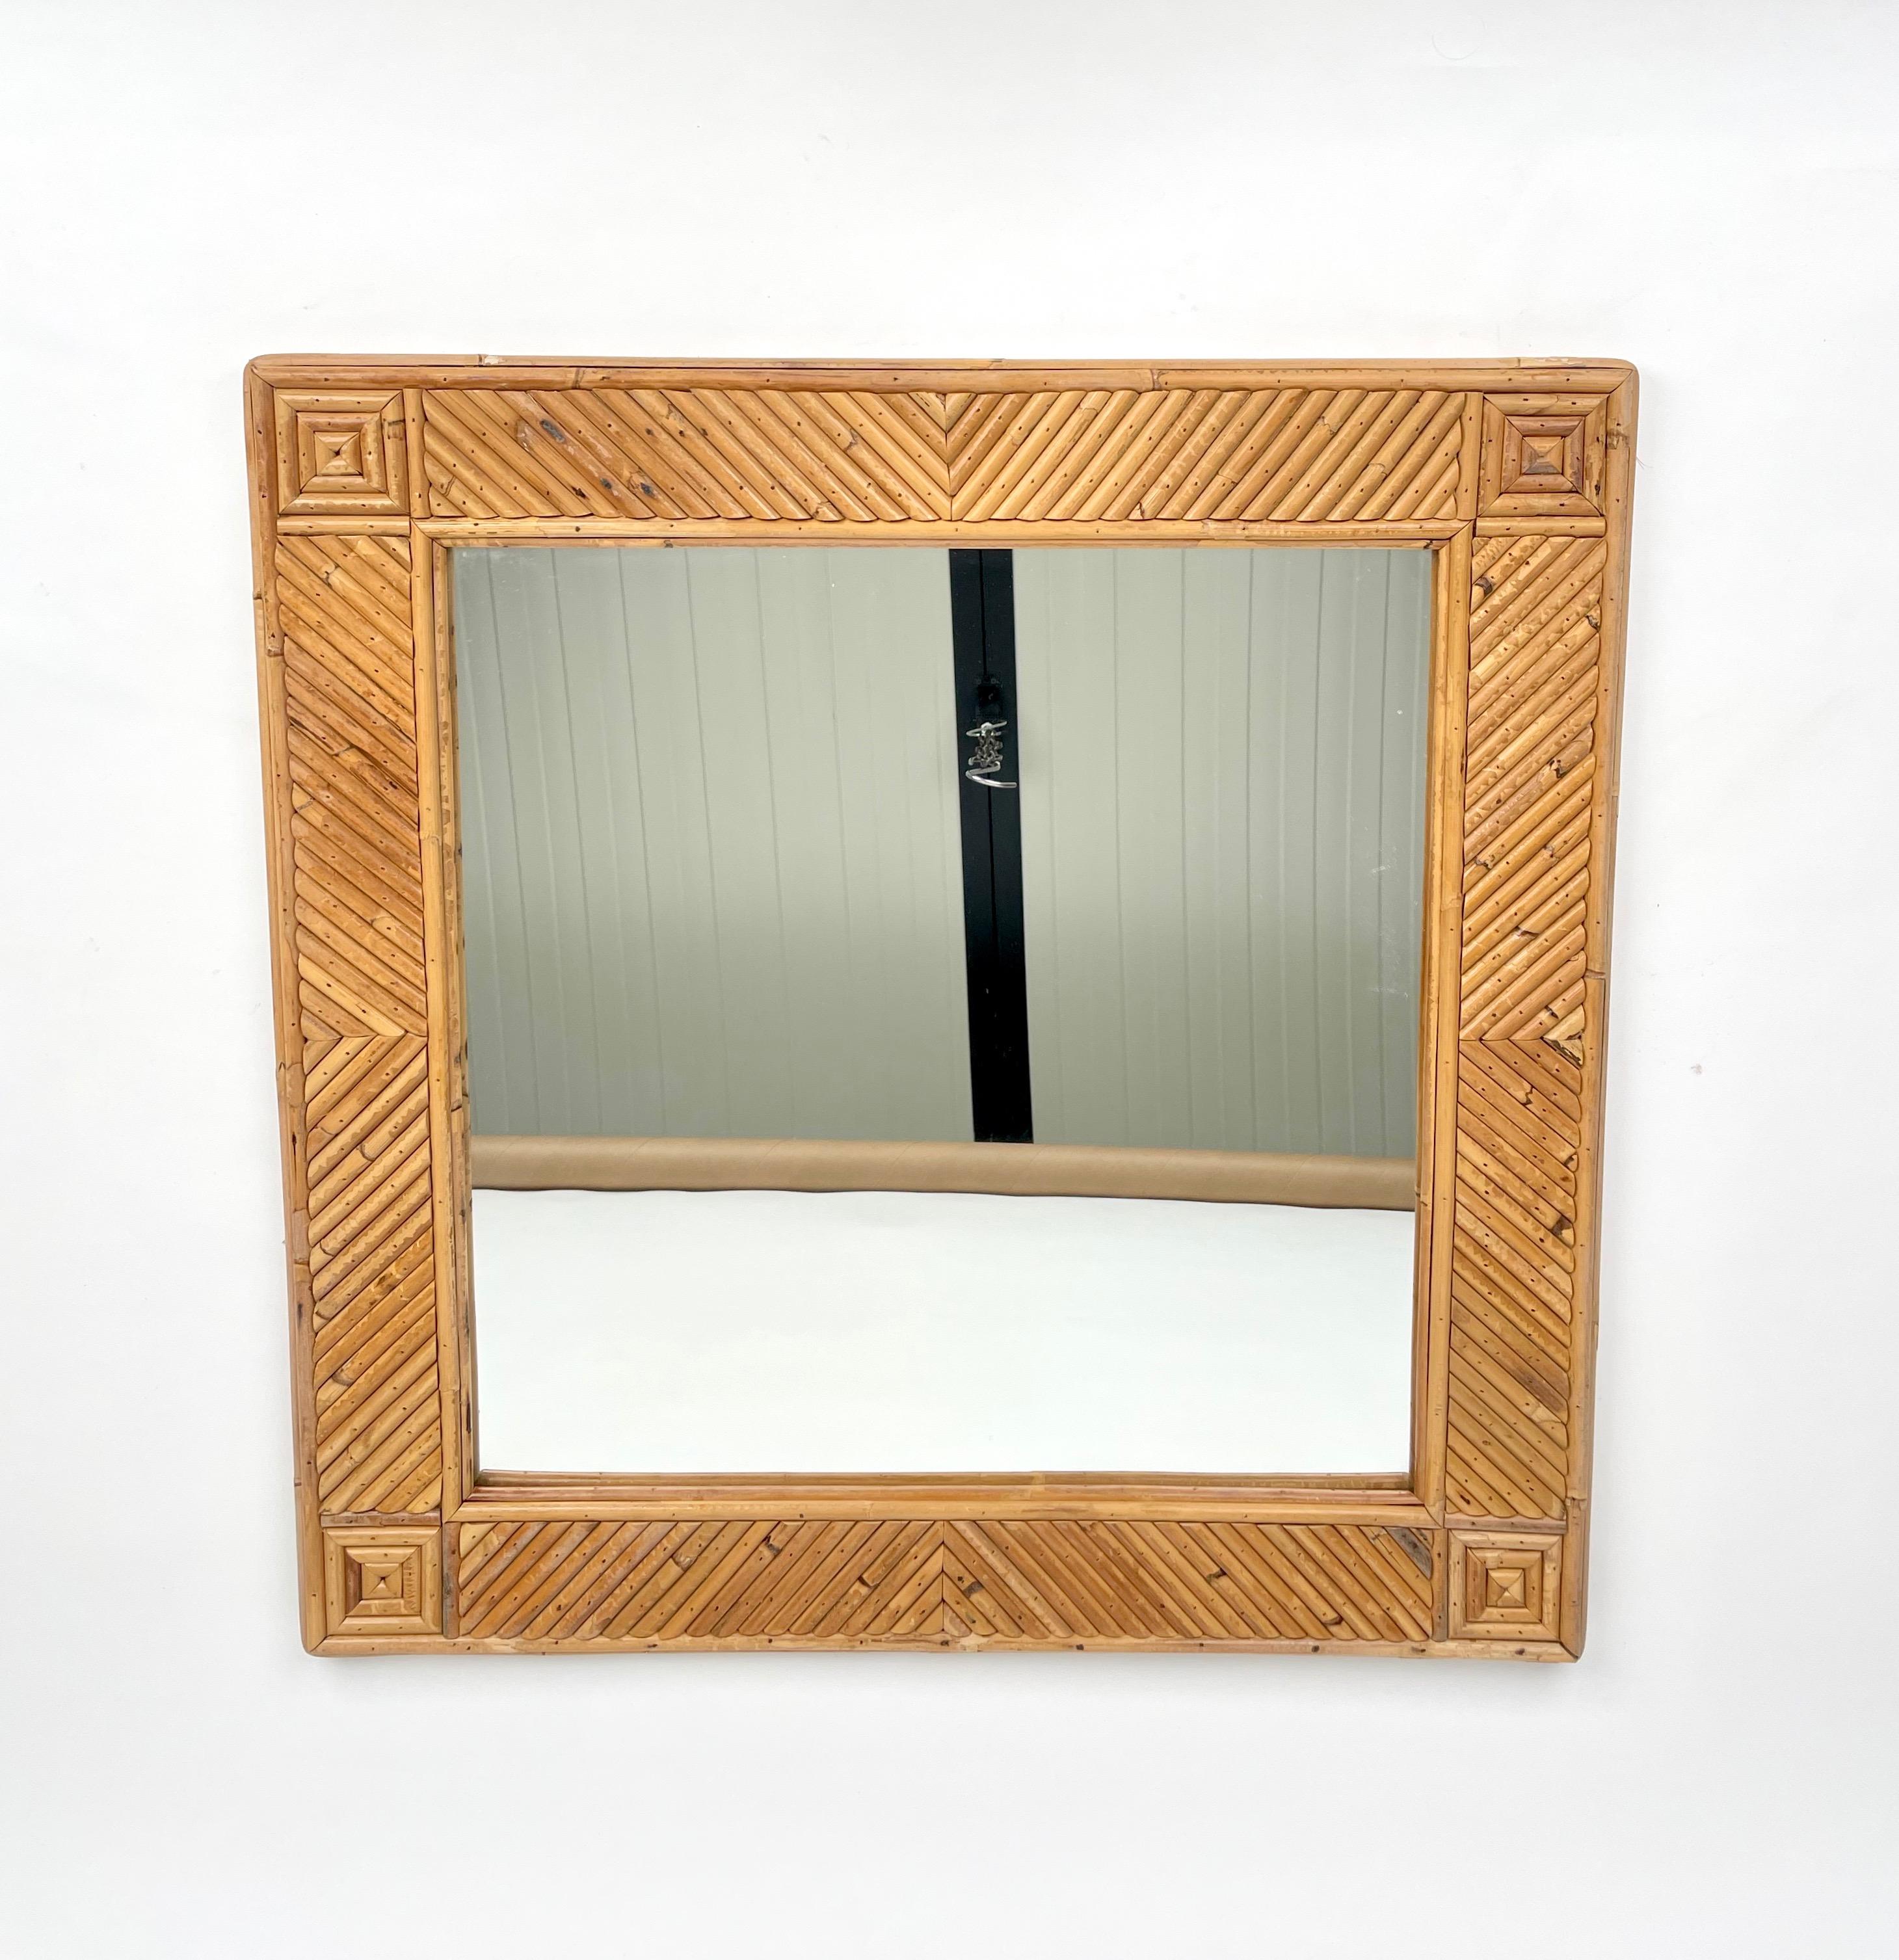 Squared wall mirror in rattan and bamboo attributed to Vivai Del Sud. 

Made in Italy in the 1970s

Vivai Del Sud was a renowned brand in Roma in the 1960s and 1970s, inspired by Gabriella Crespi, bringing the mediteranean bamboo and rattan